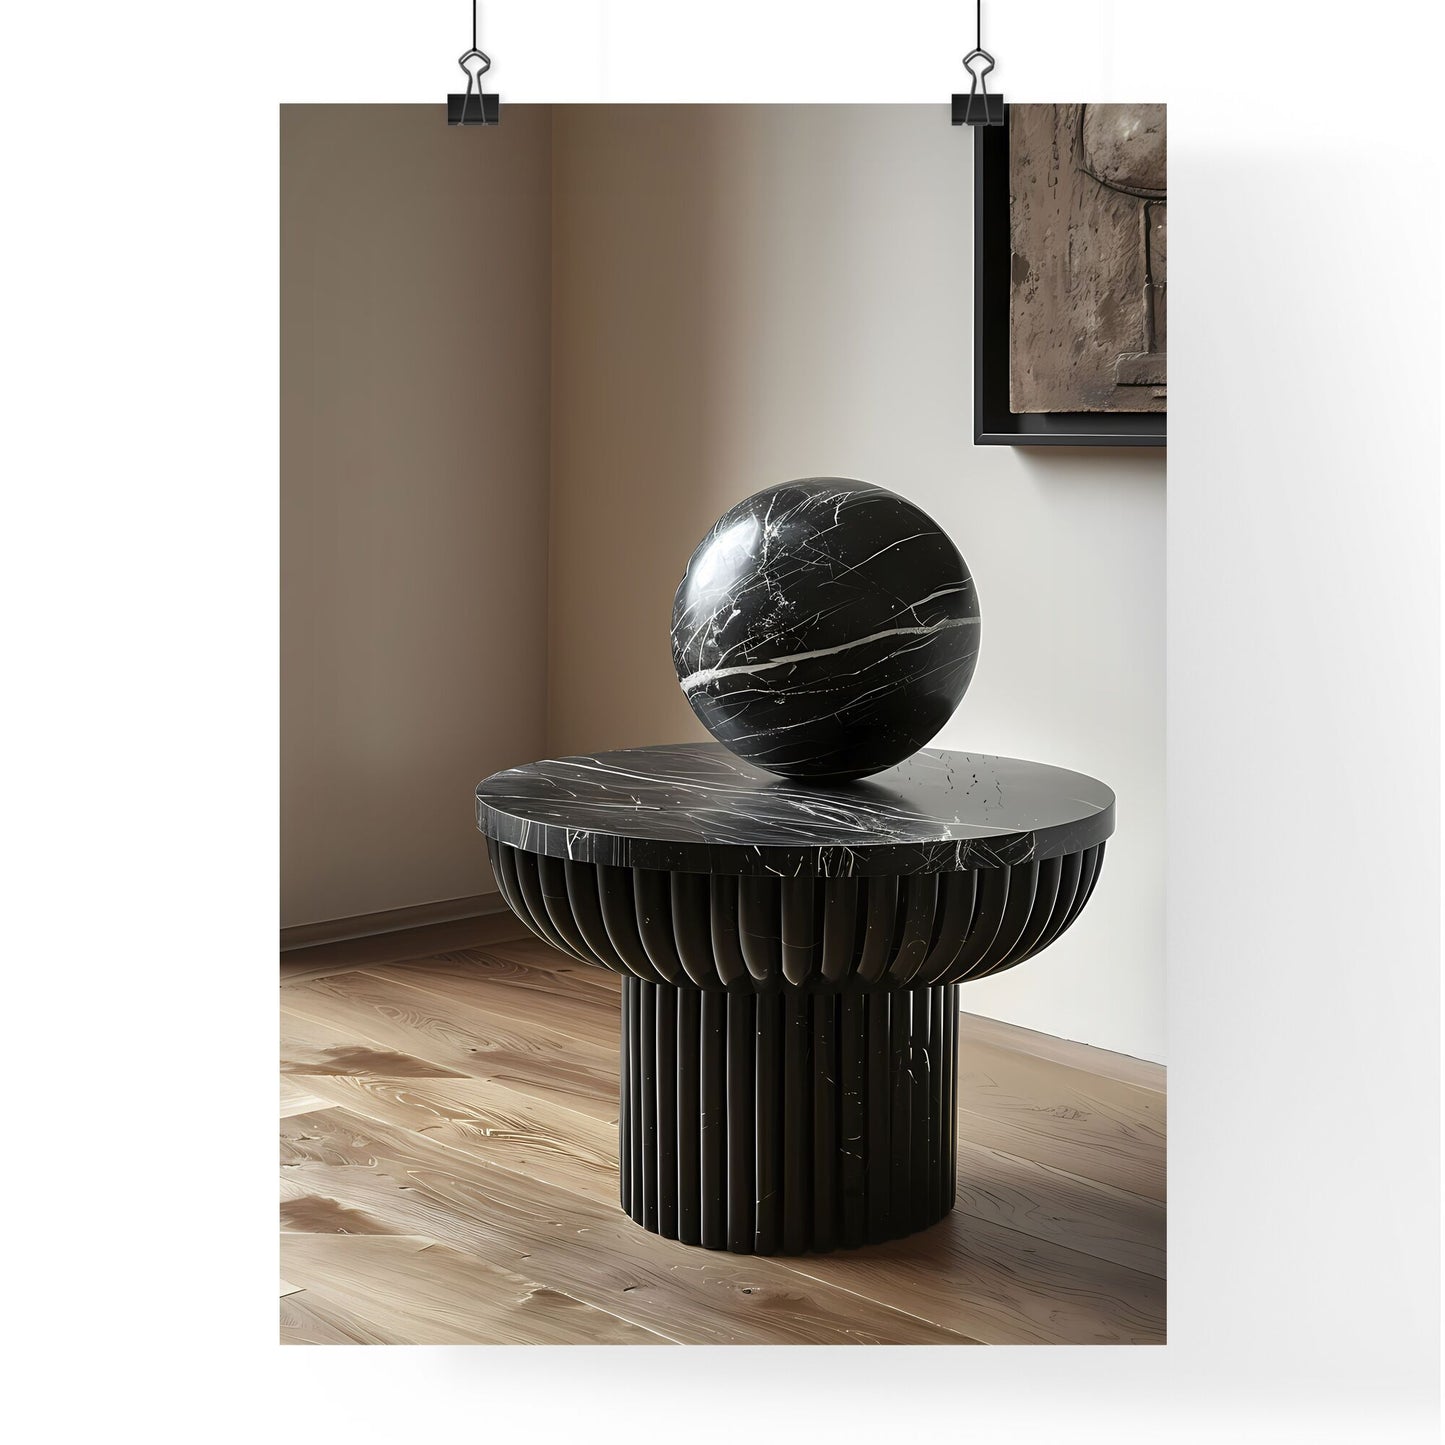 Minimalist Product Photography: Marble Table with Abstract Sculpture and Vibrant Painting Default Title